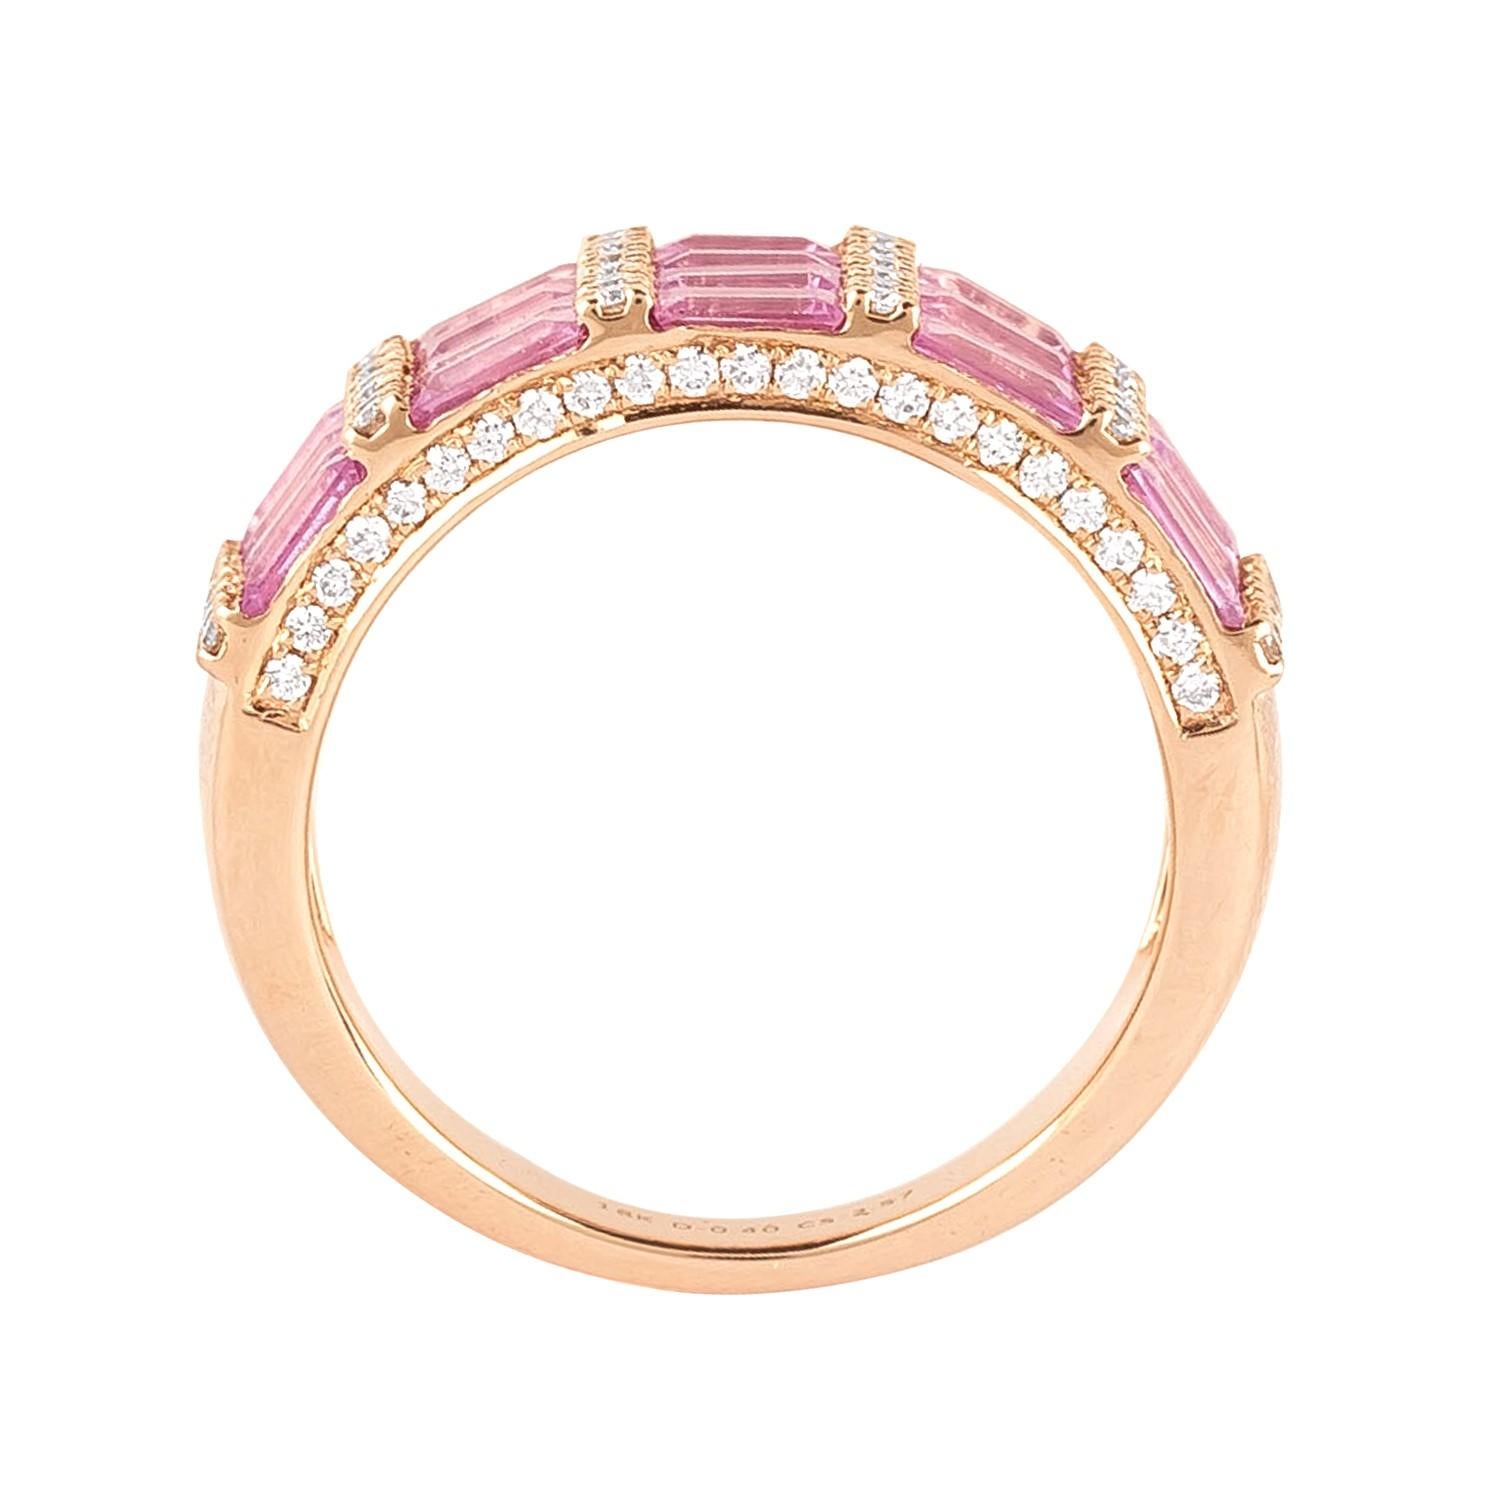 18 Karat Gold 2.91 Carat Diamond and Pink Sapphire Eternity Band Ring  For Sale 1